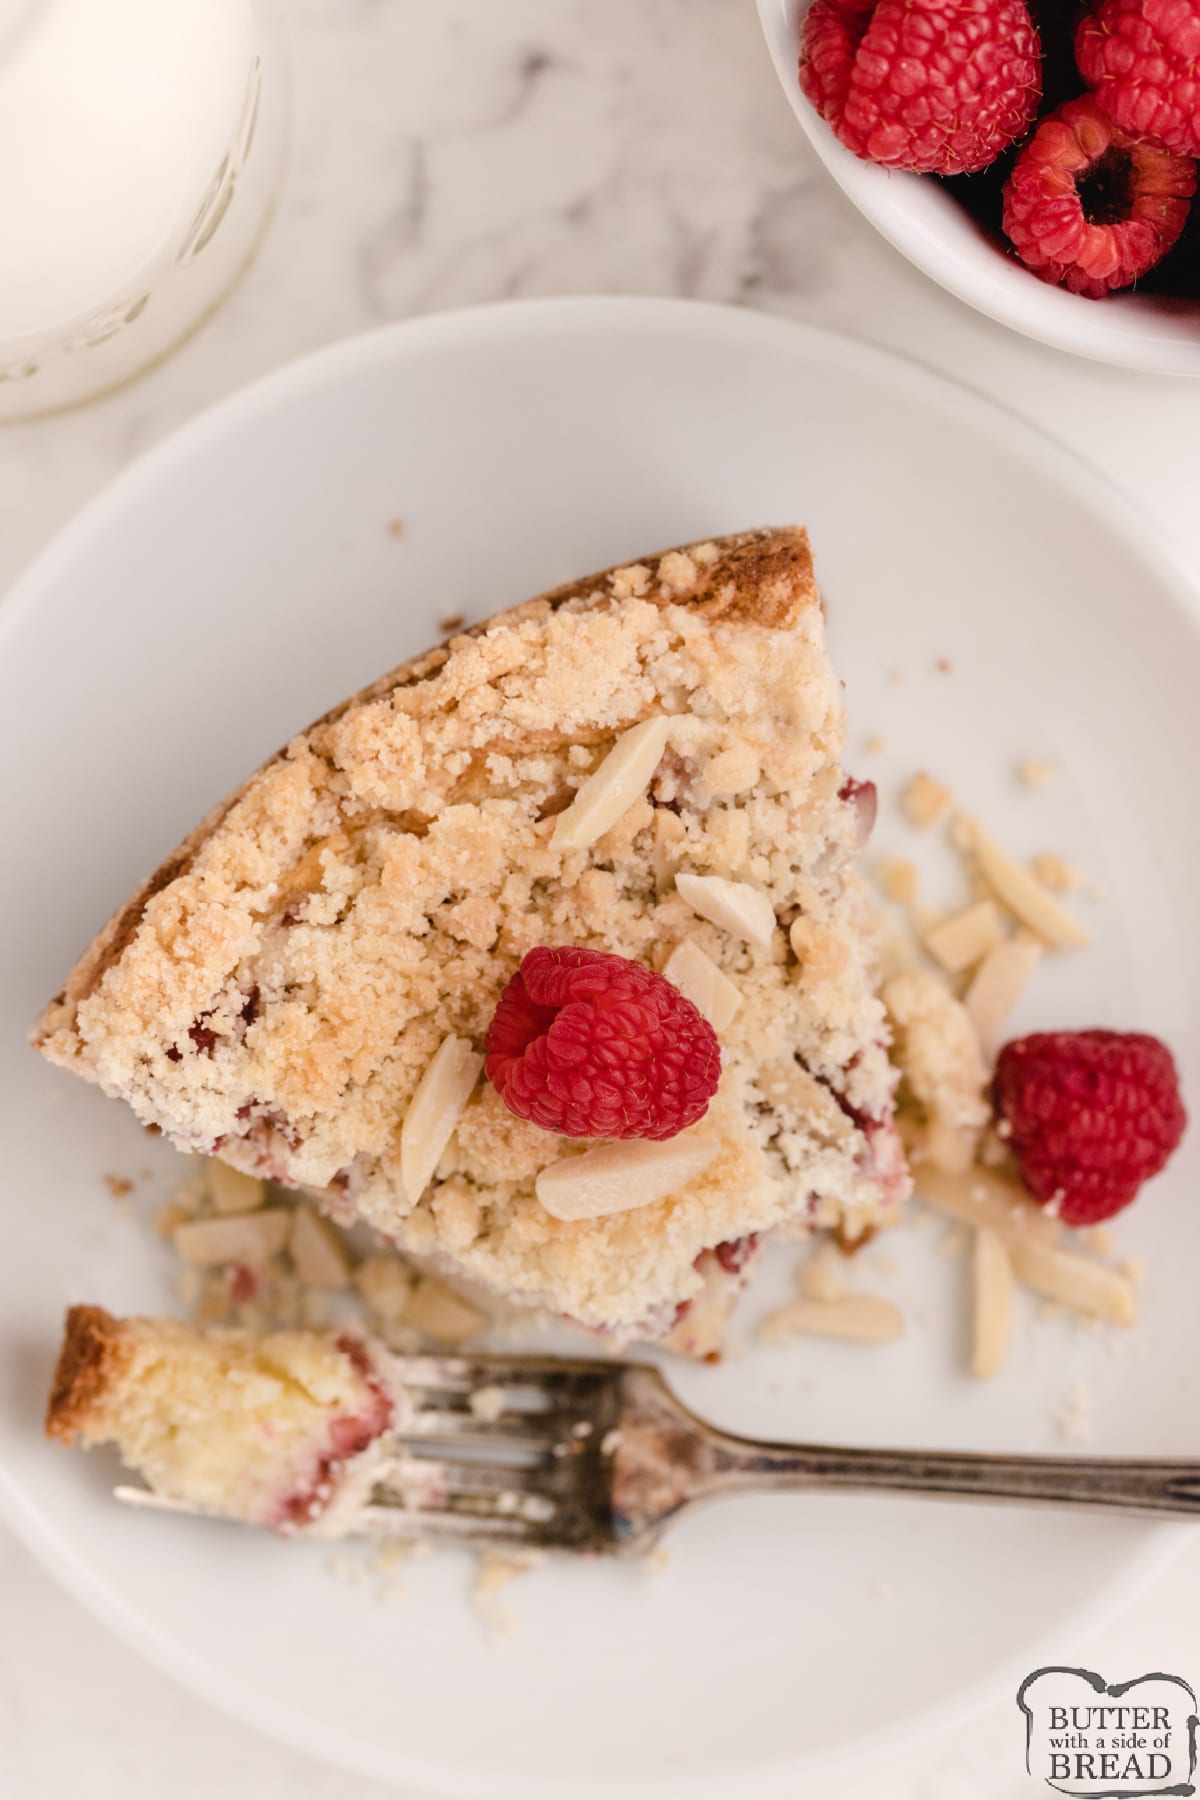 Raspberry Cream Cheese Coffee Cake is rich, moist and filled with sweetened cream cheese and a raspberry jam filling. Fantastic flavor in this simple breakfast cake recipe that everyone loves!